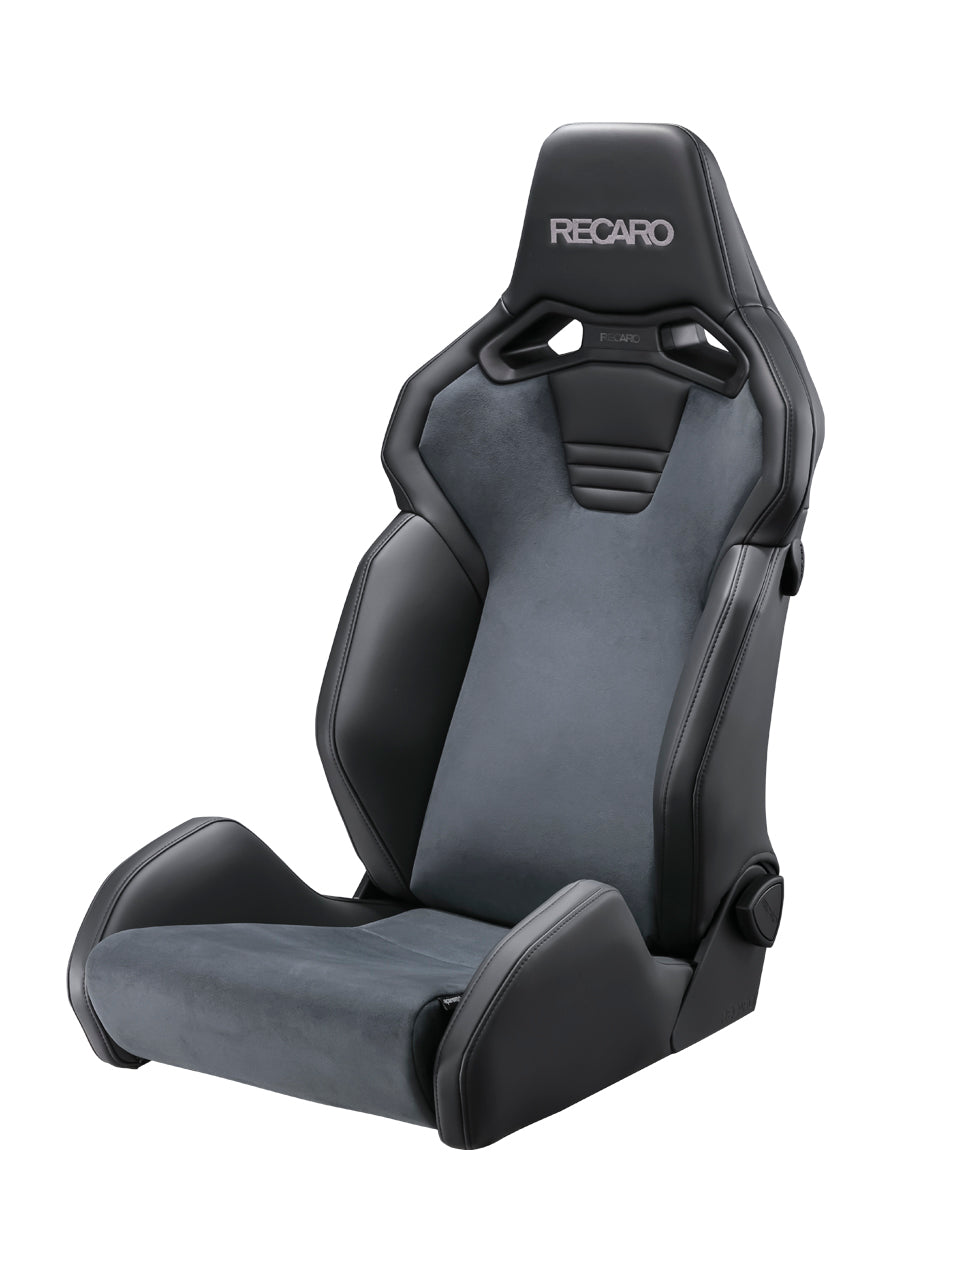 RECARO SR-S UT100 CG BK ULTRA SUEDE CHARCOAL GRAY AND ARTIFICIAL LEATHER BLACK COLOR SEAT 81-120.20.645-0